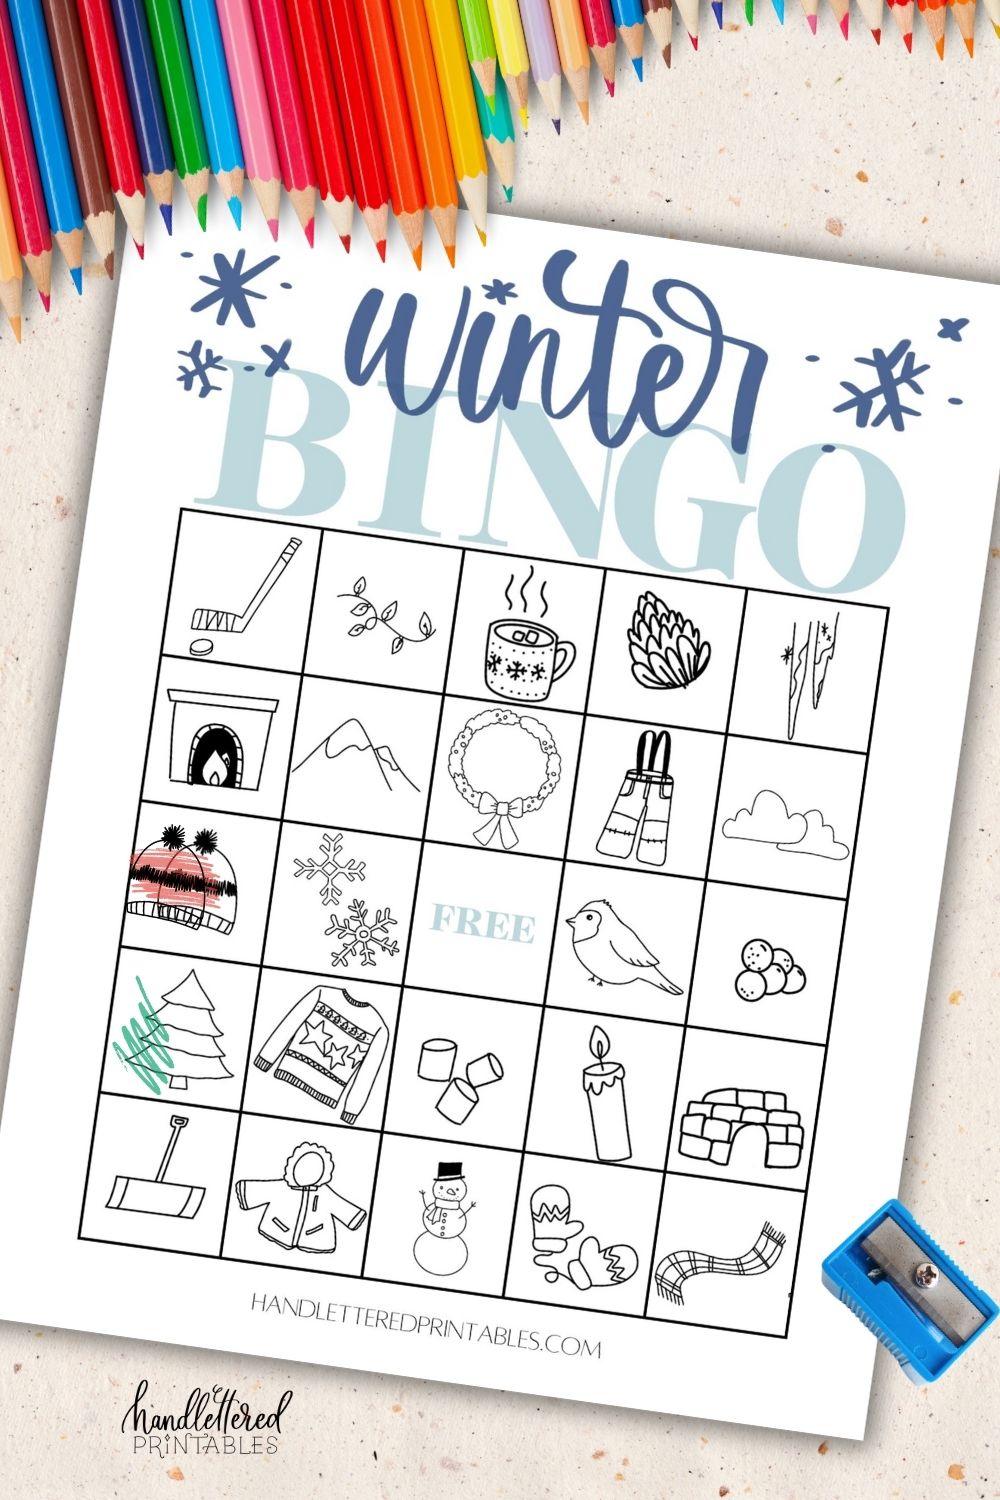 Free printable winter bingo card printed and being coloured with pencil crayons on countertop